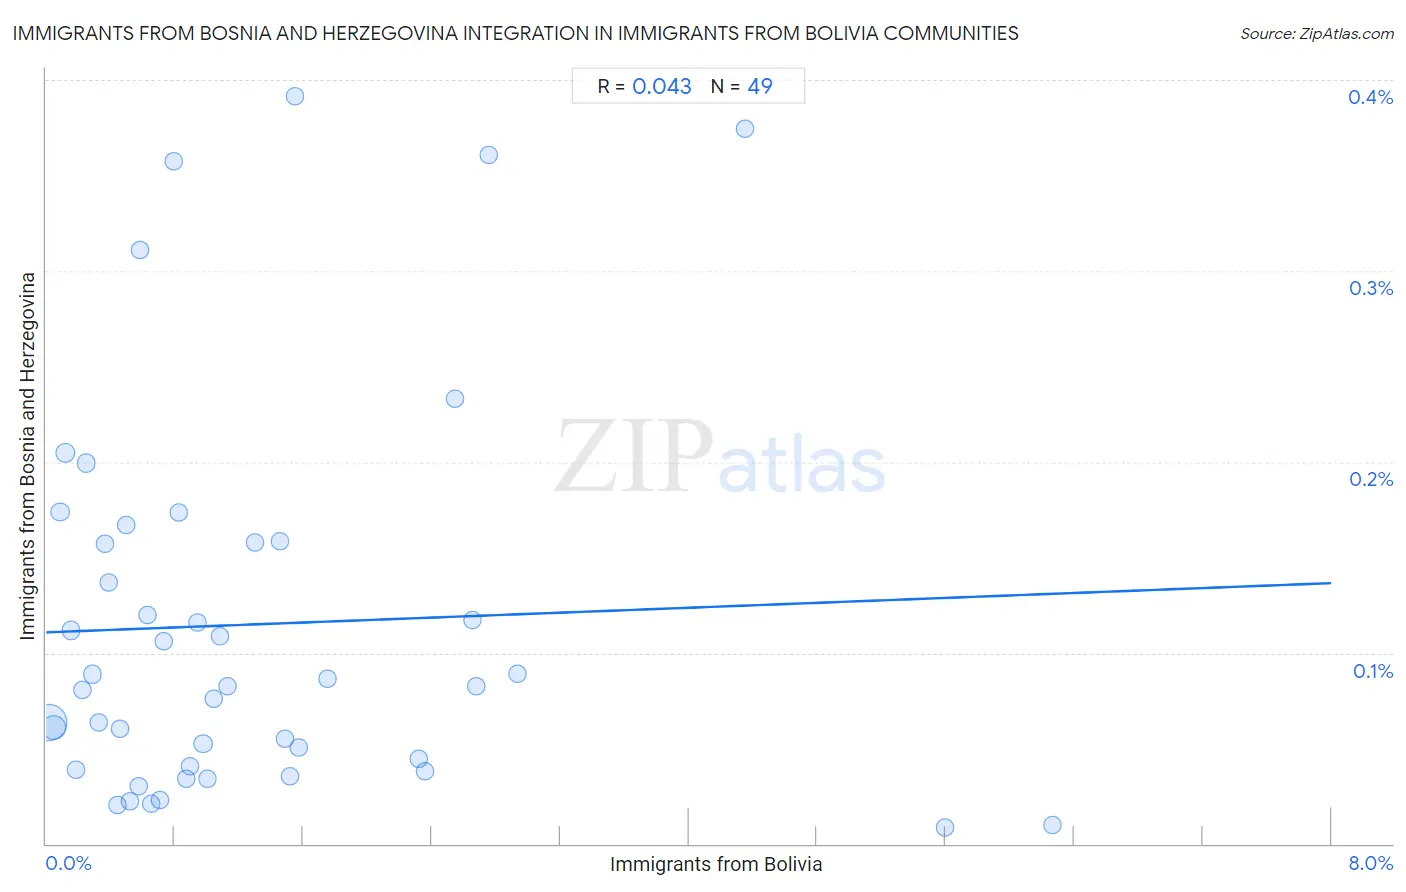 Immigrants from Bolivia Integration in Immigrants from Bosnia and Herzegovina Communities